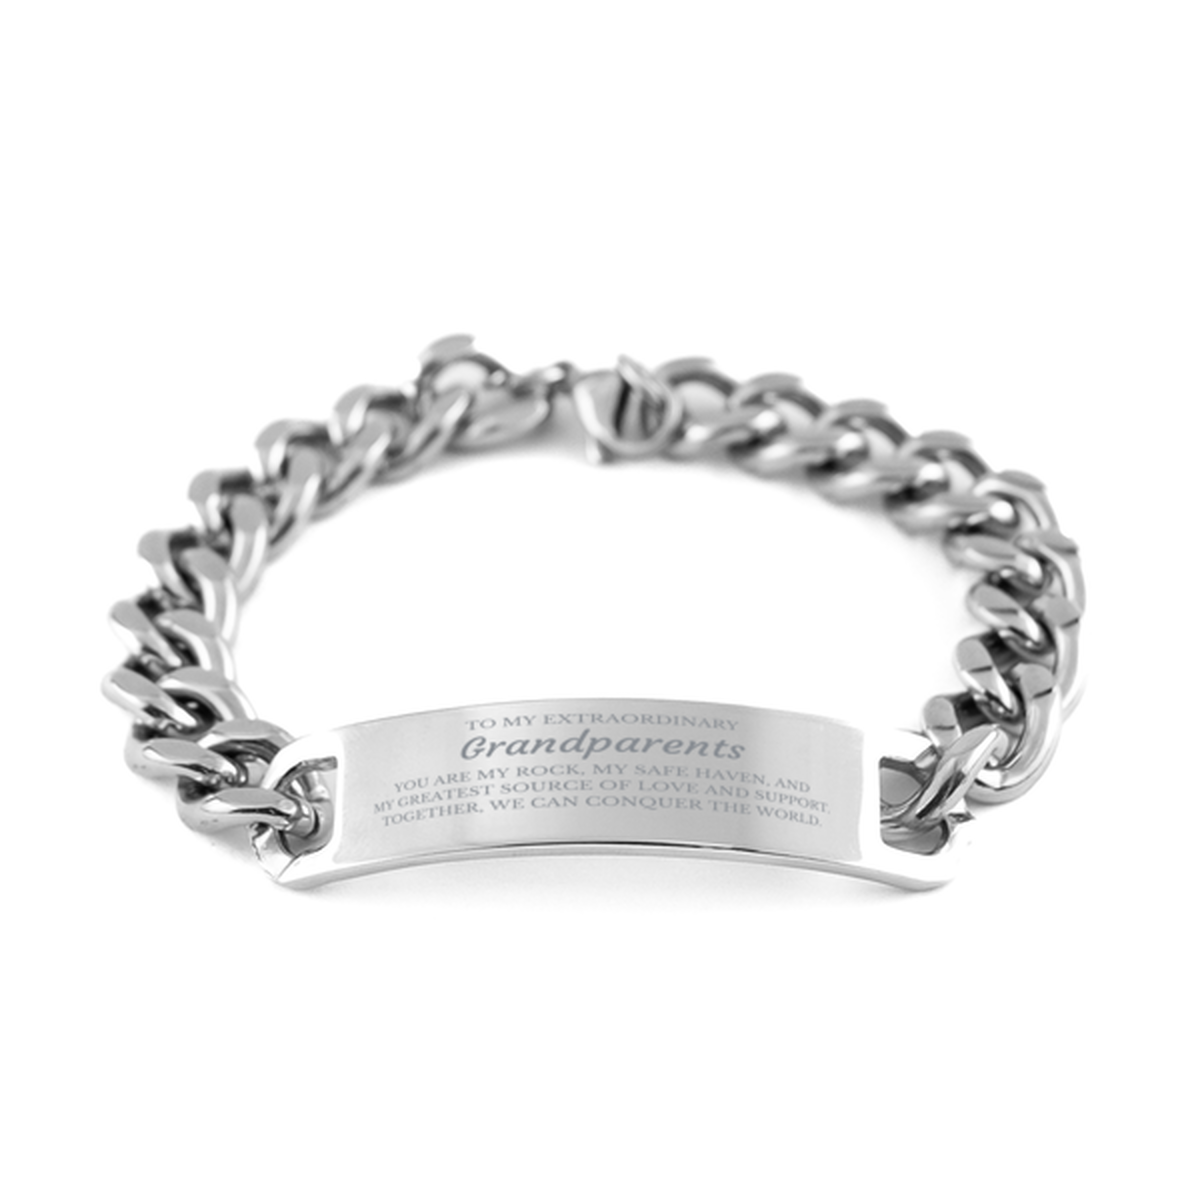 To My Extraordinary Grandparents Gifts, Together, we can conquer the world, Birthday Cuban Chain Stainless Steel Bracelet For Grandparents, Christmas Gifts For Grandparents